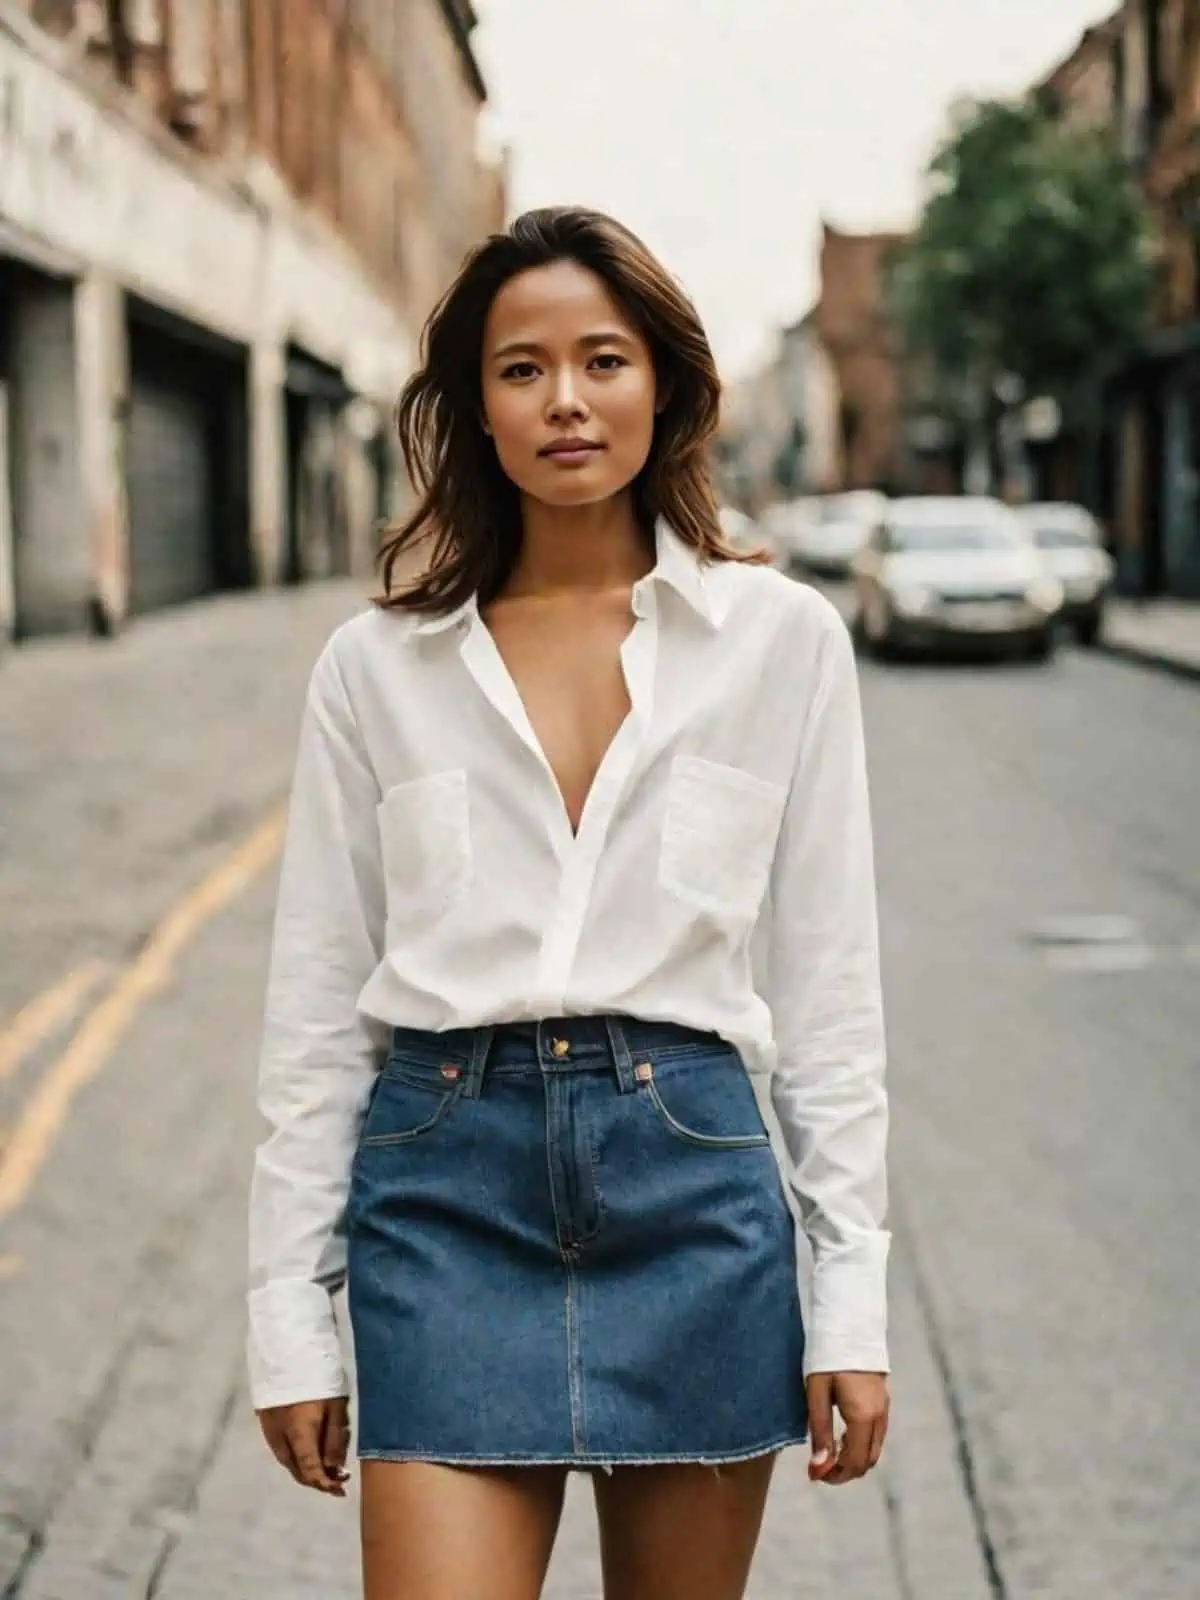 How to Wear a Denim Mini Skirt Over 30 - Jeans and a Teacup